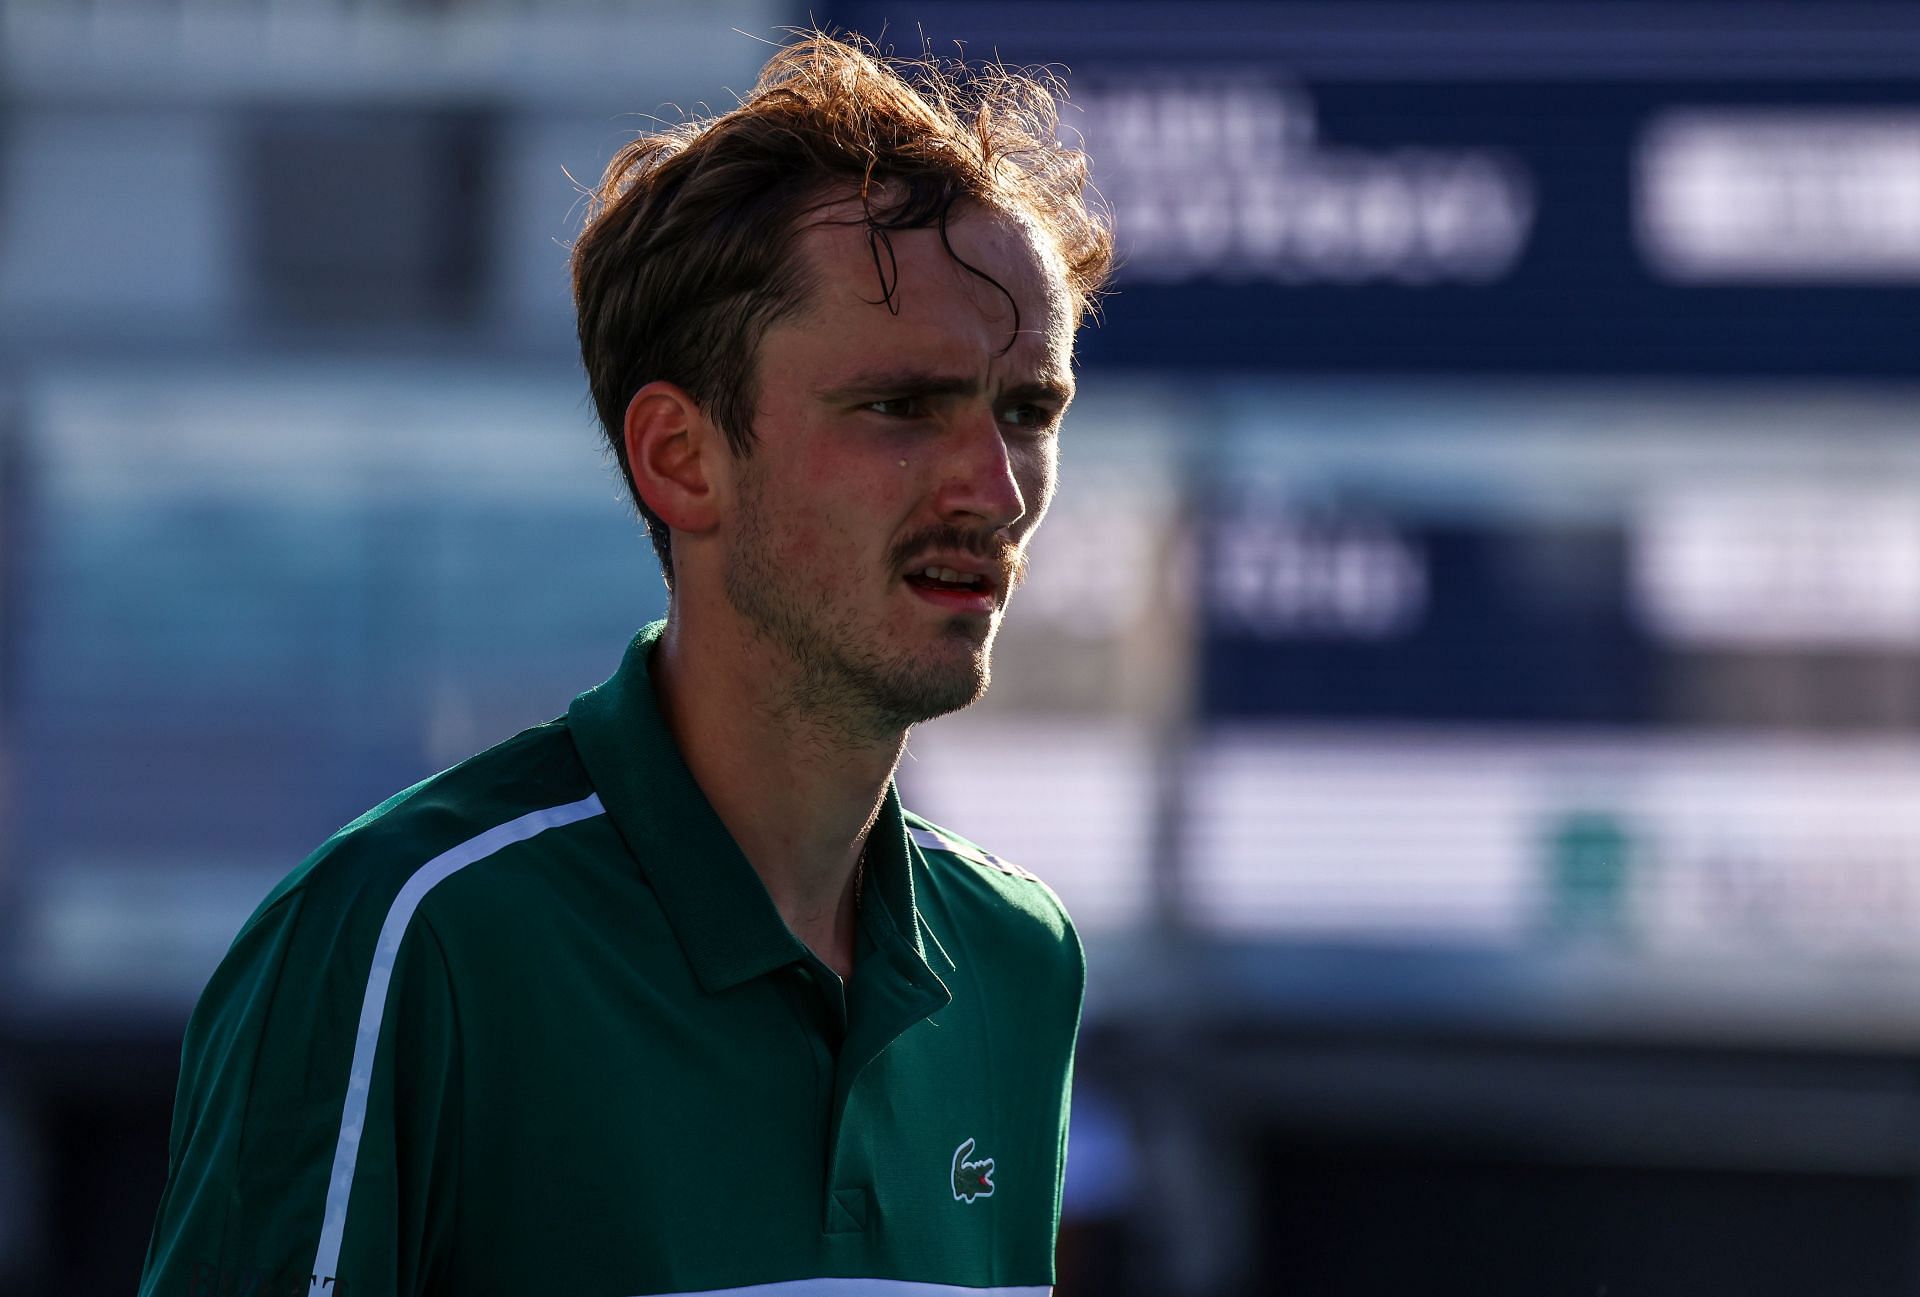 Daniil Medvedev needs to put in the performance of a lifetime in Miami to reclaim the top spot